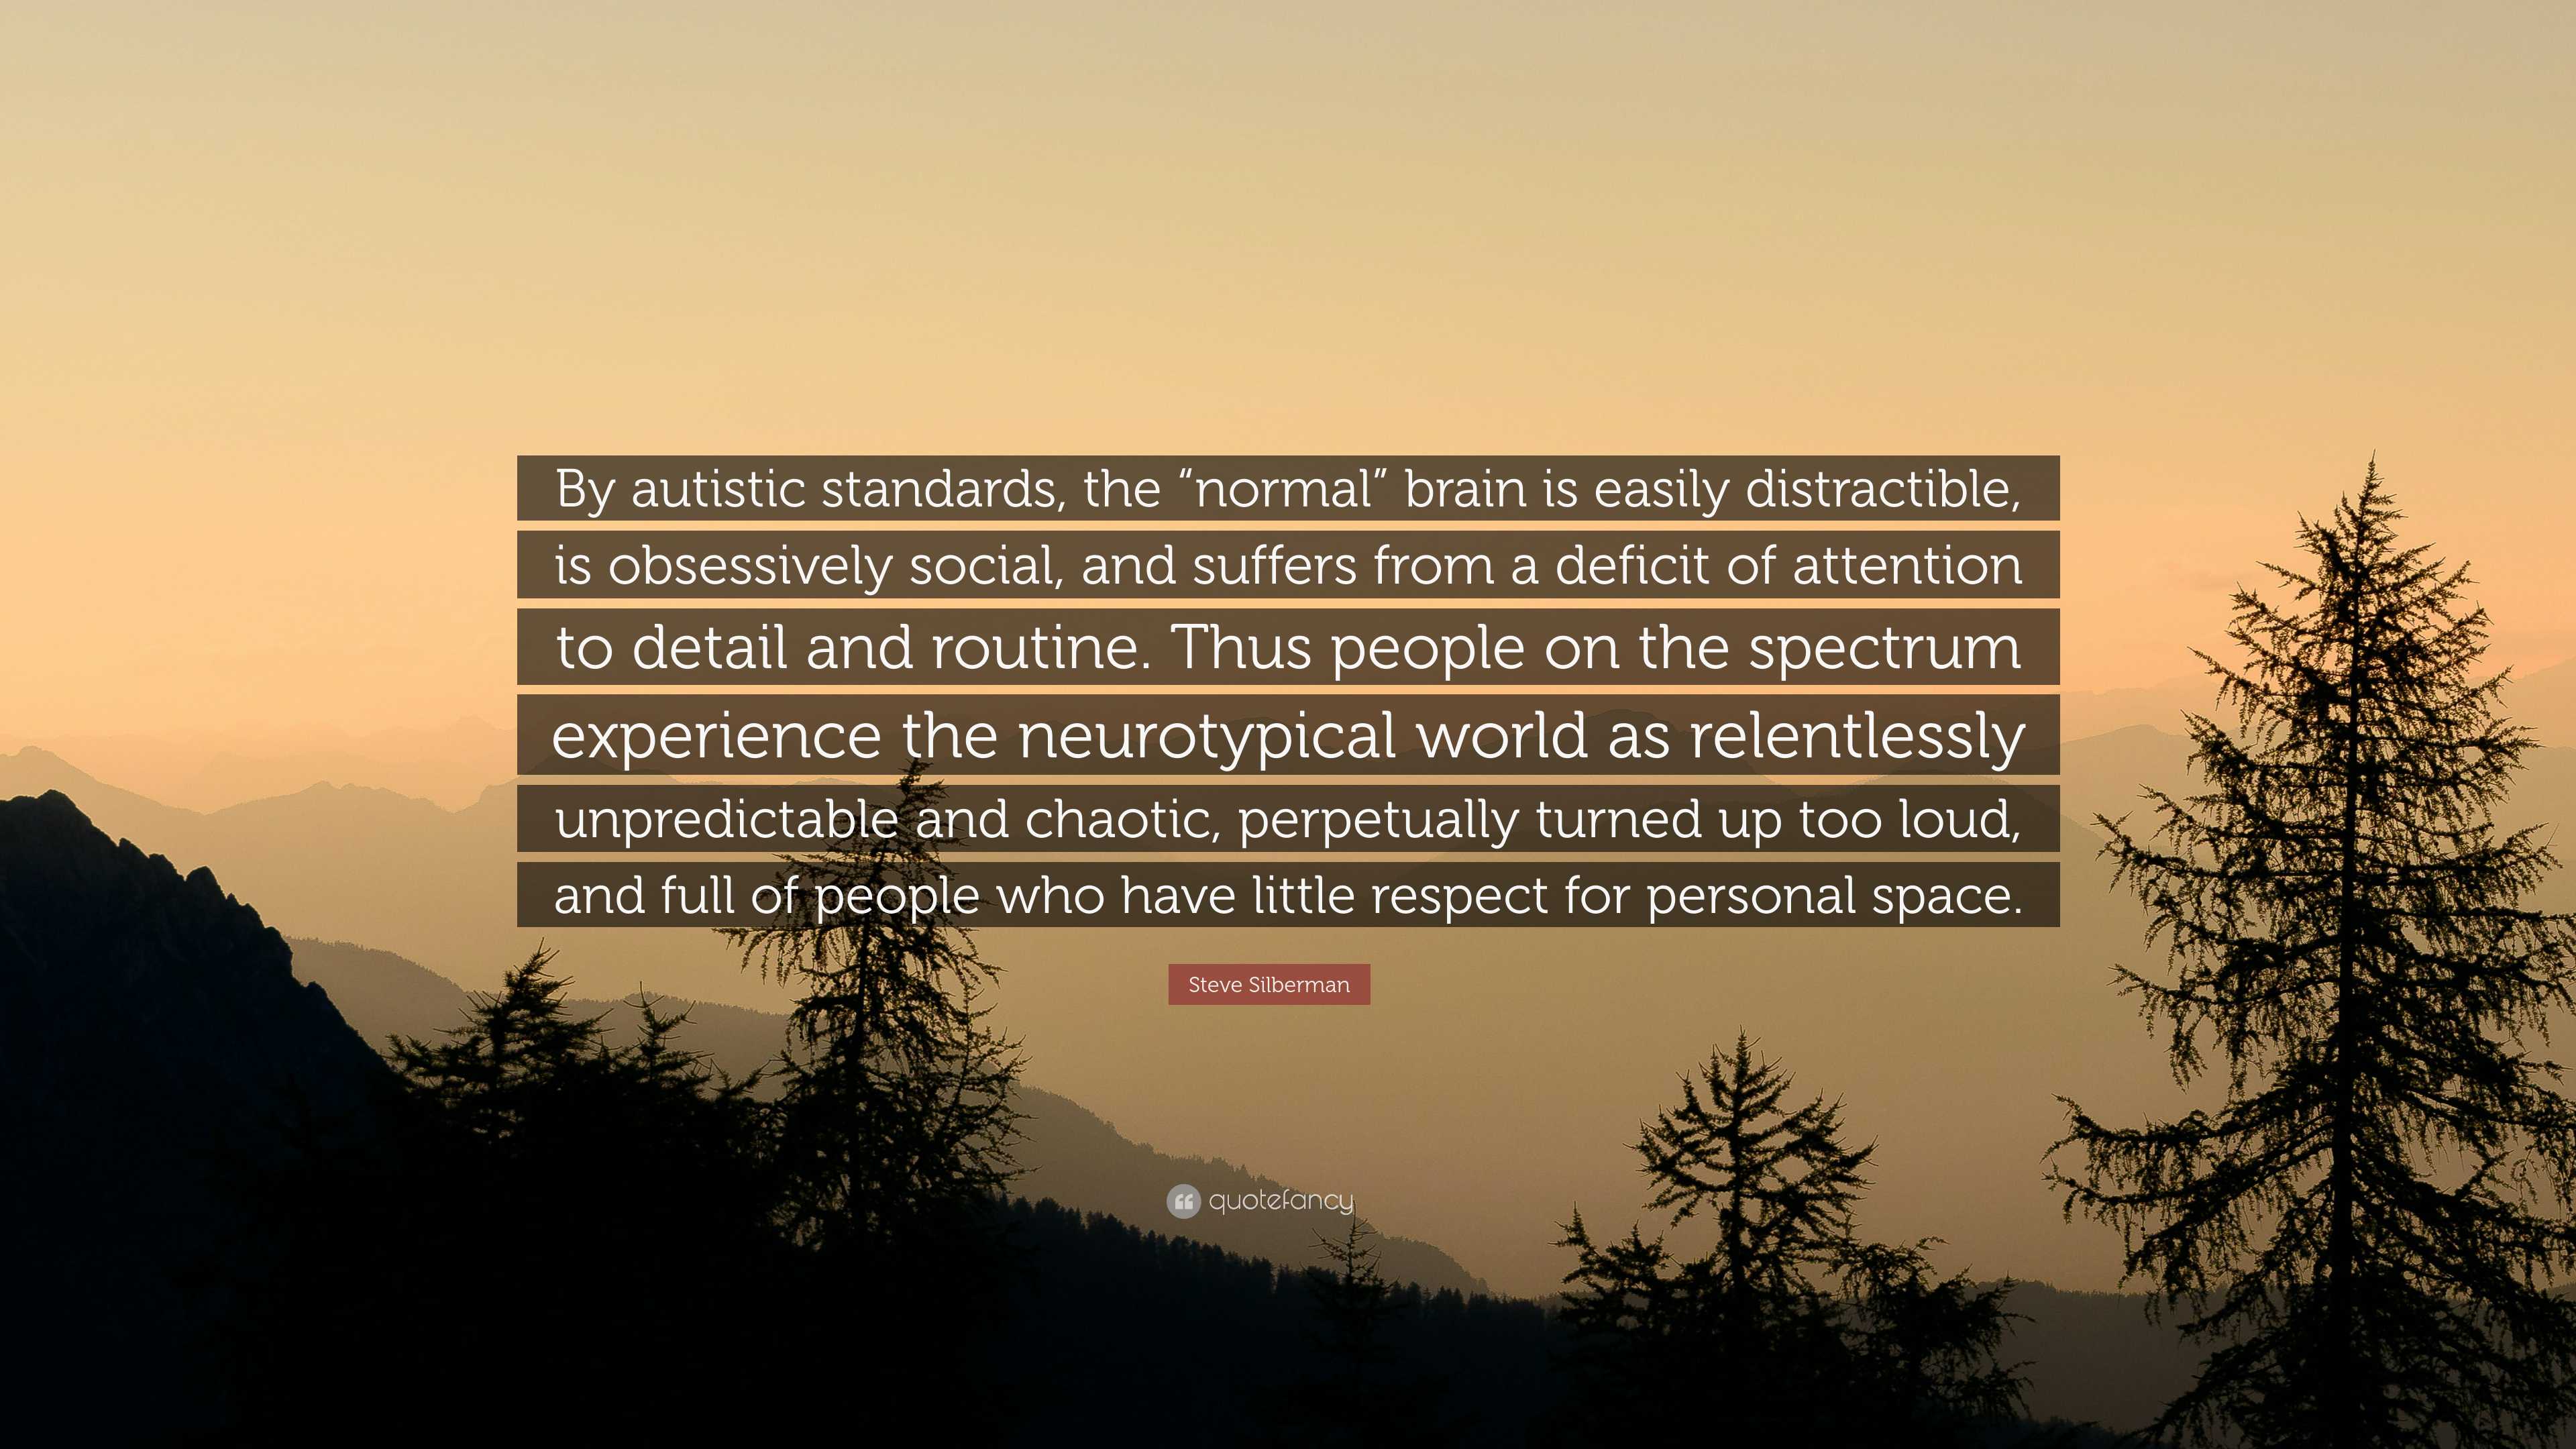 Steve Silberman Quote “by Autistic Standards The “normal” Brain Is Easily Distractible Is